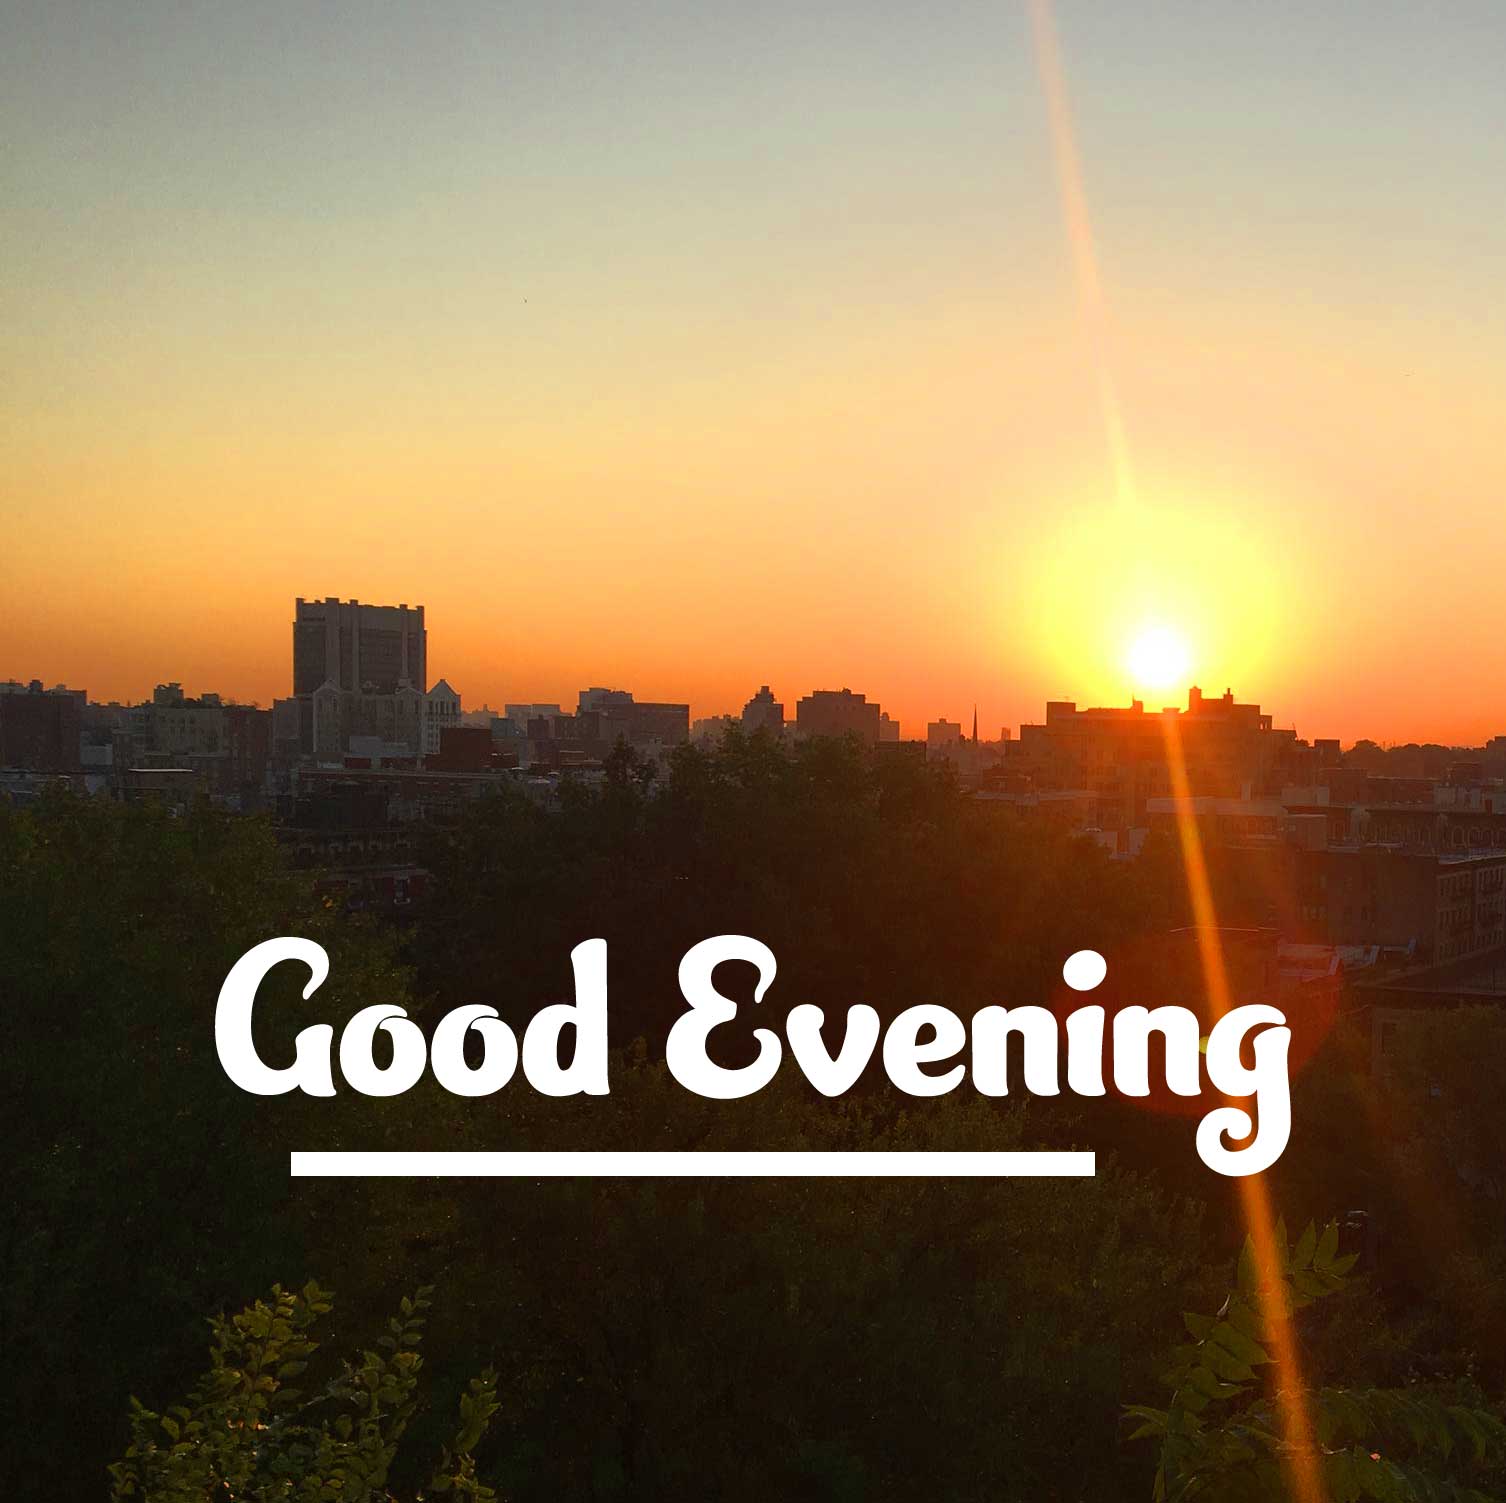 Good Evening Wishes Images Pics Wallpaper Free Download 